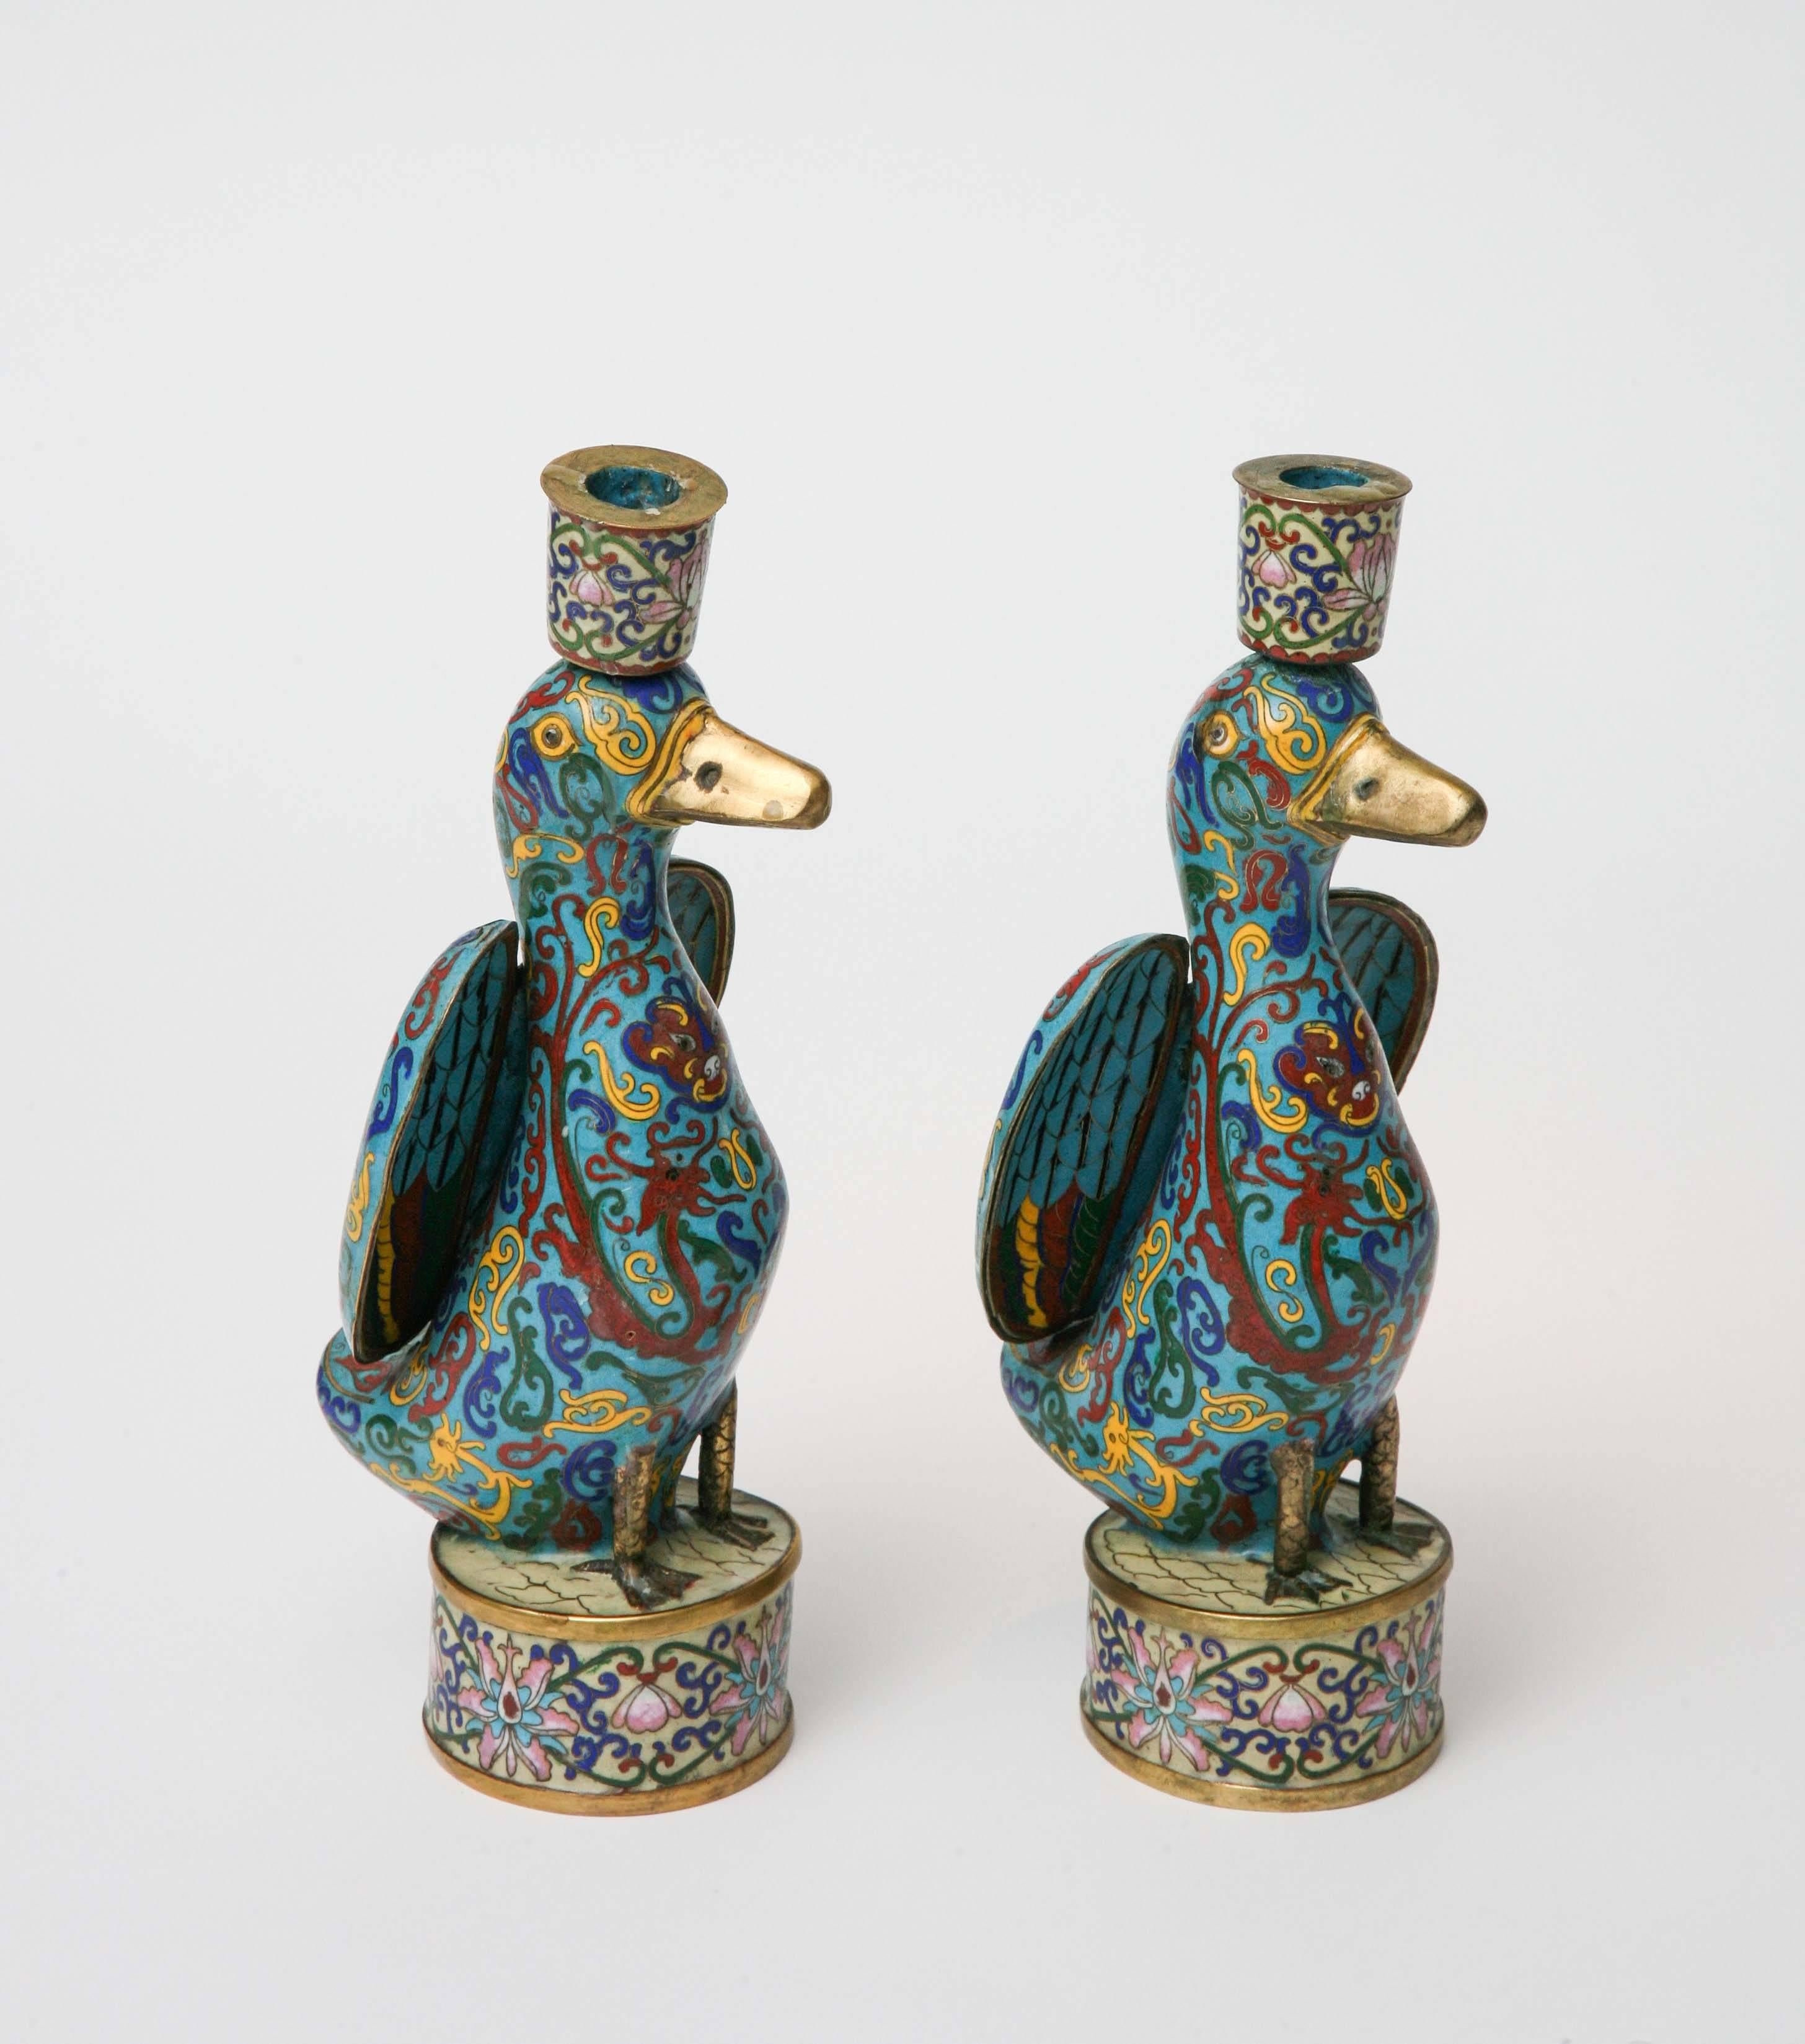 Whimsical pair of duck cloisonné candleholders made for the Chinese export market. The pair shows remarkable craftsmanship and has vibrant colors of turquoise and deep blue, pink, yellow, and crimson. 

The technique of containing enamel within